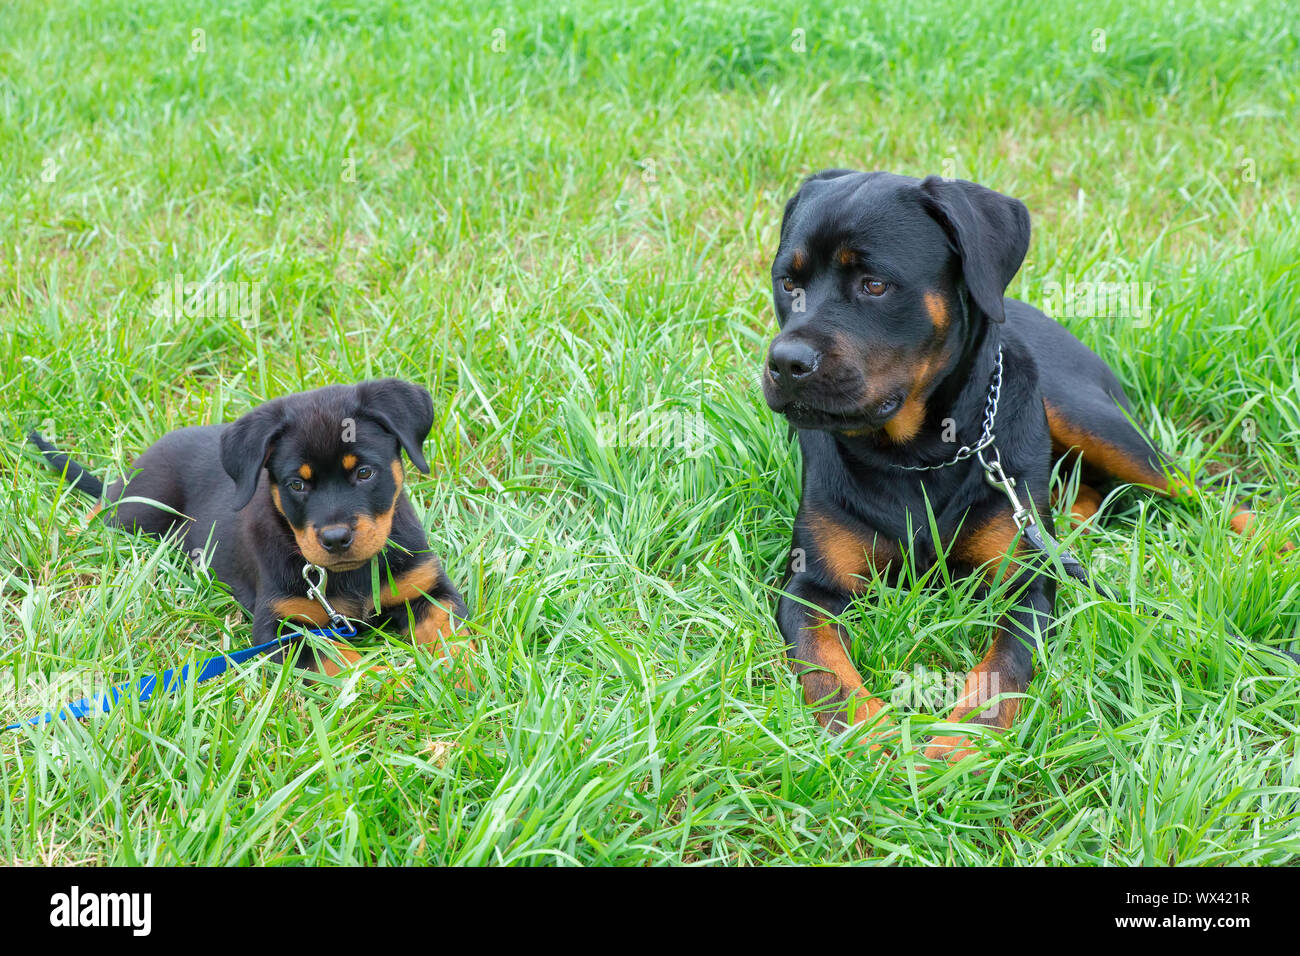 Puppy and adult rottweiler lying together in grass Stock Photo